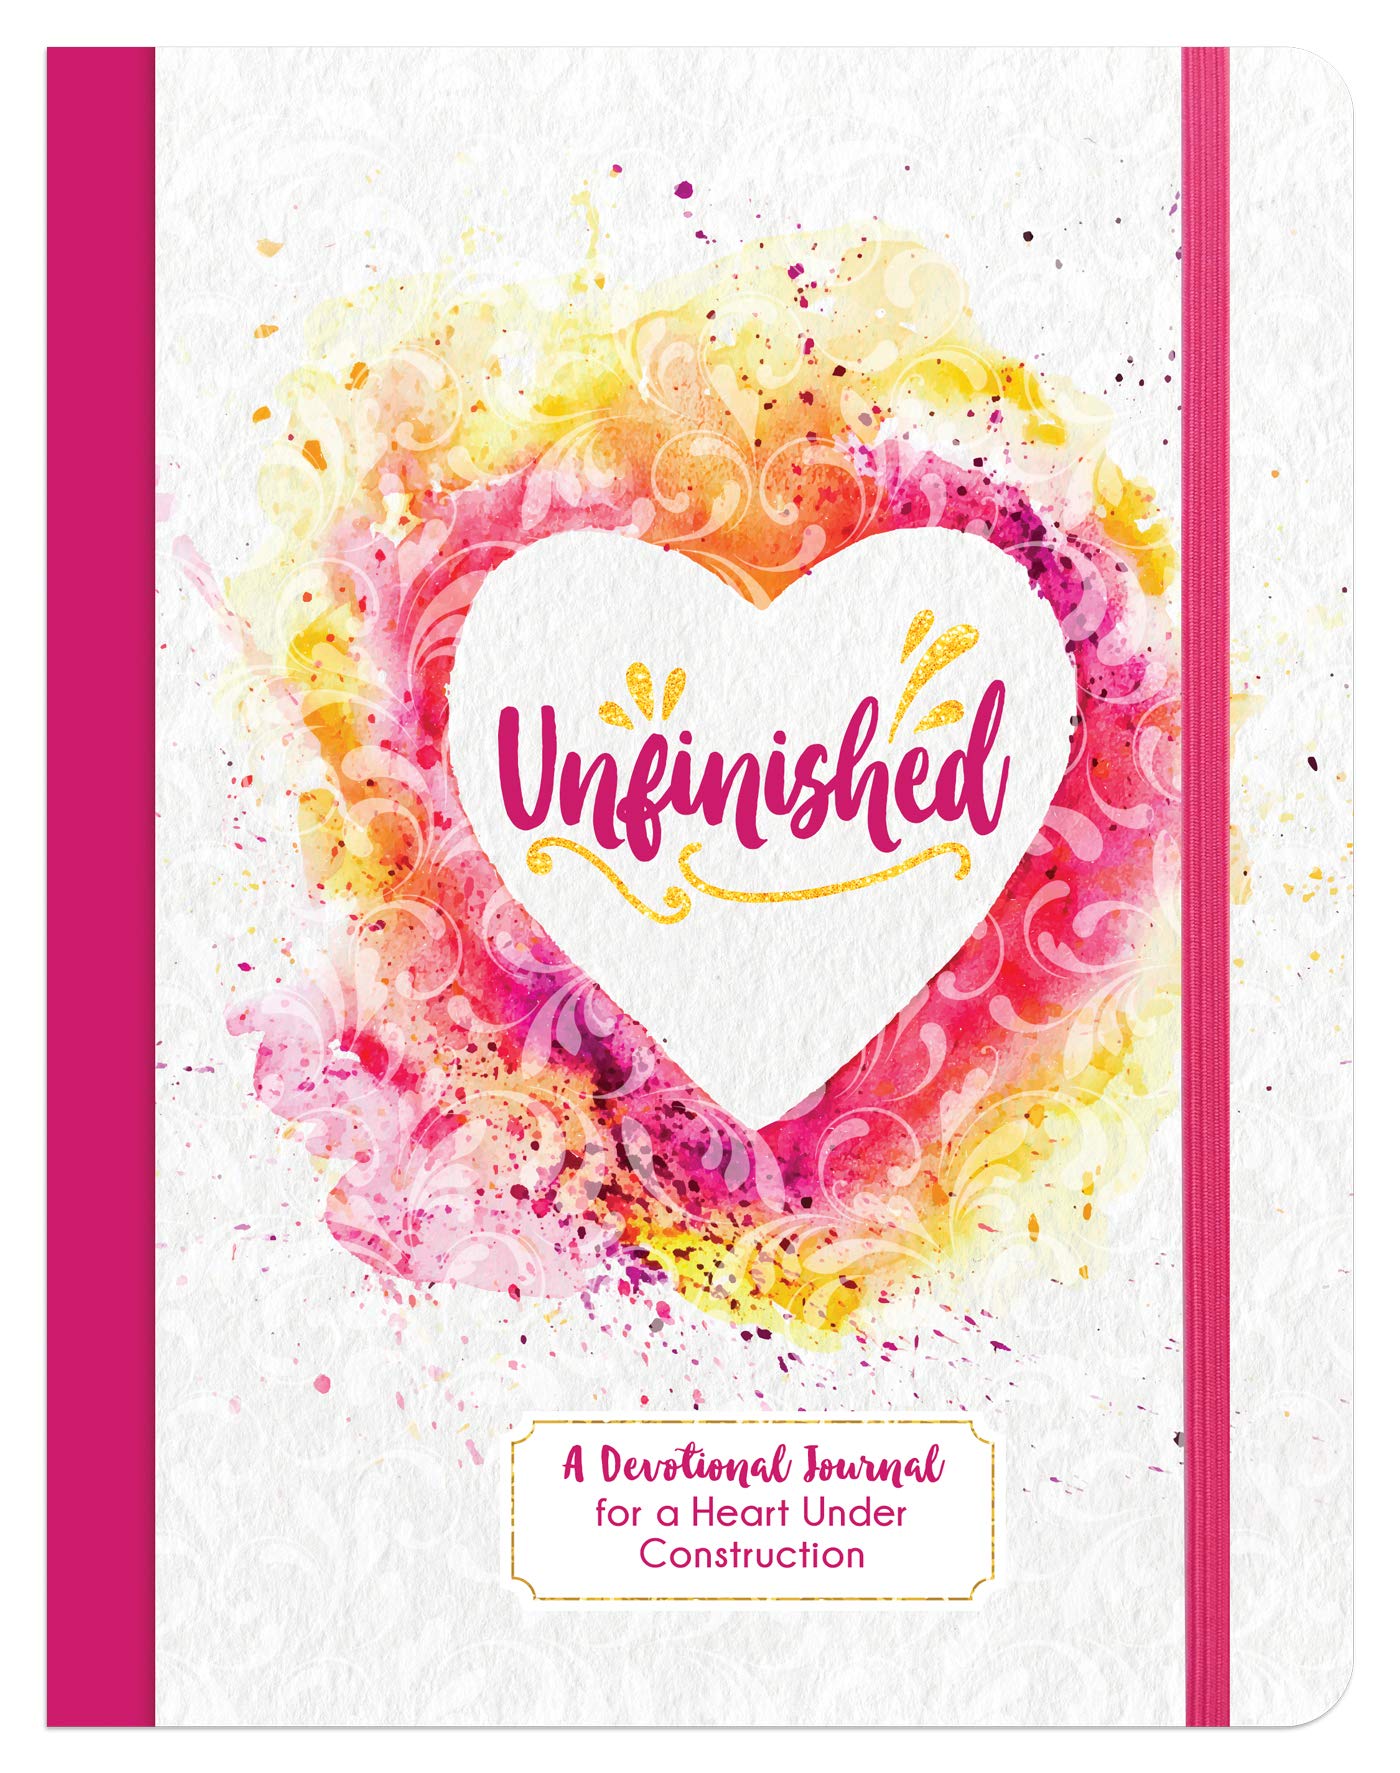 ROCKONLINE | Unfinished, A Devotional Journal for a Heart Under Construction | Barbour Books | Christian Living | Journaling | Devotional | New Creation Church | NCC | Joseph Prince | ROCK Bookshop | ROCK Bookstore | Star Vista | Free delivery for Singapore Orders above $50.